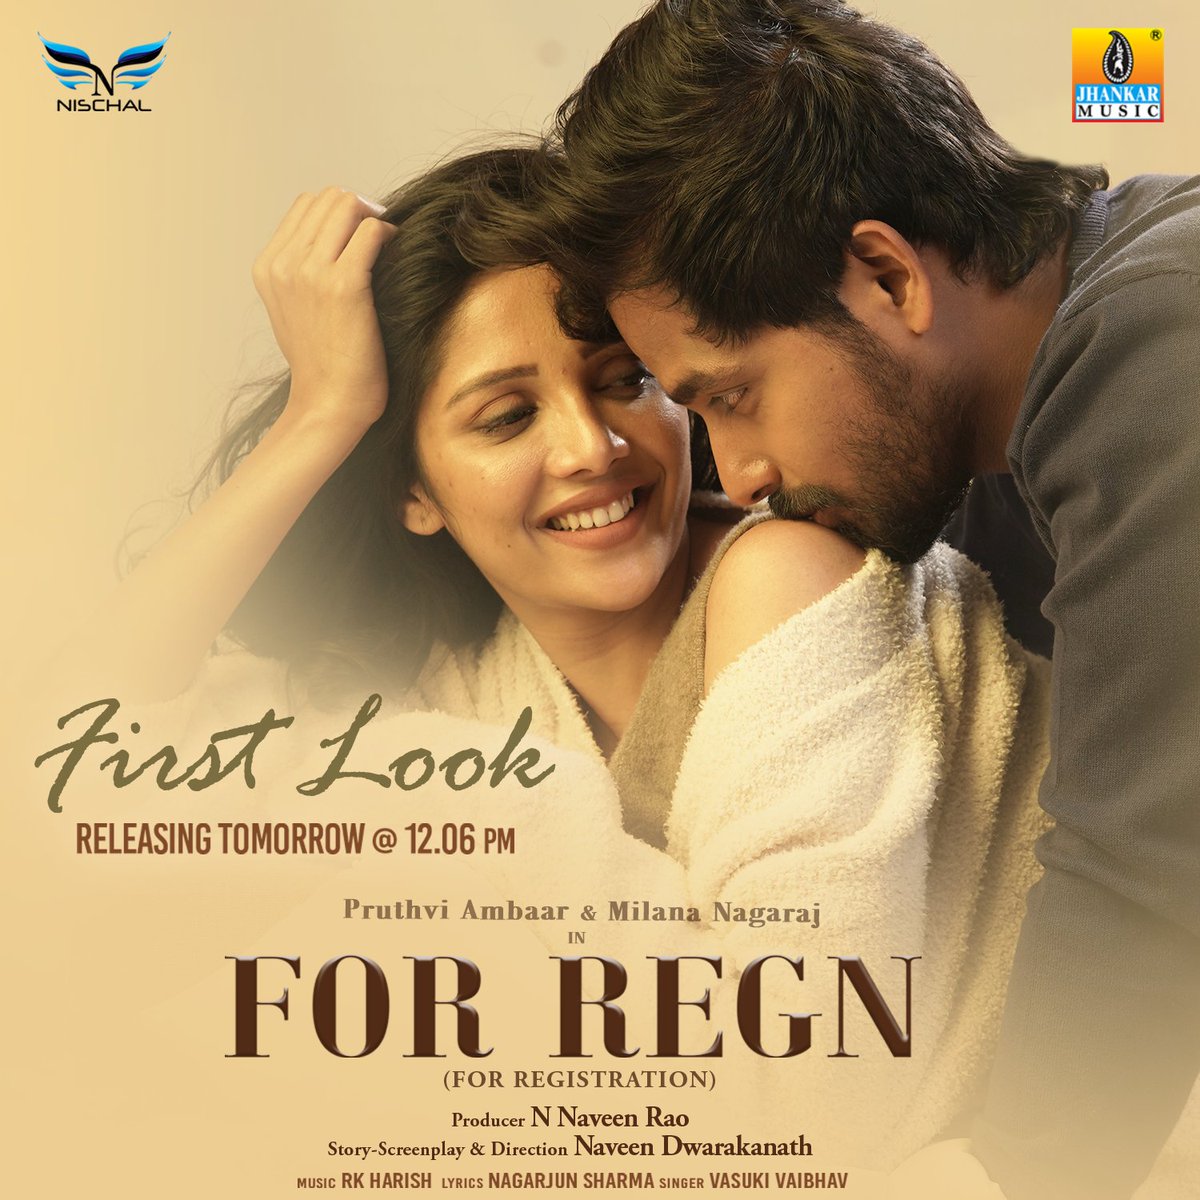 #ForRegn First Look Video Releasing Tomorrow 12:06 PM Starring Pruthvi Ambaar @AmbarPruthvi Milana Nagaraj @MilanaNagaraj Stay tuned & subscribe to our channel to get notified ► goo.gl/nHtdG8